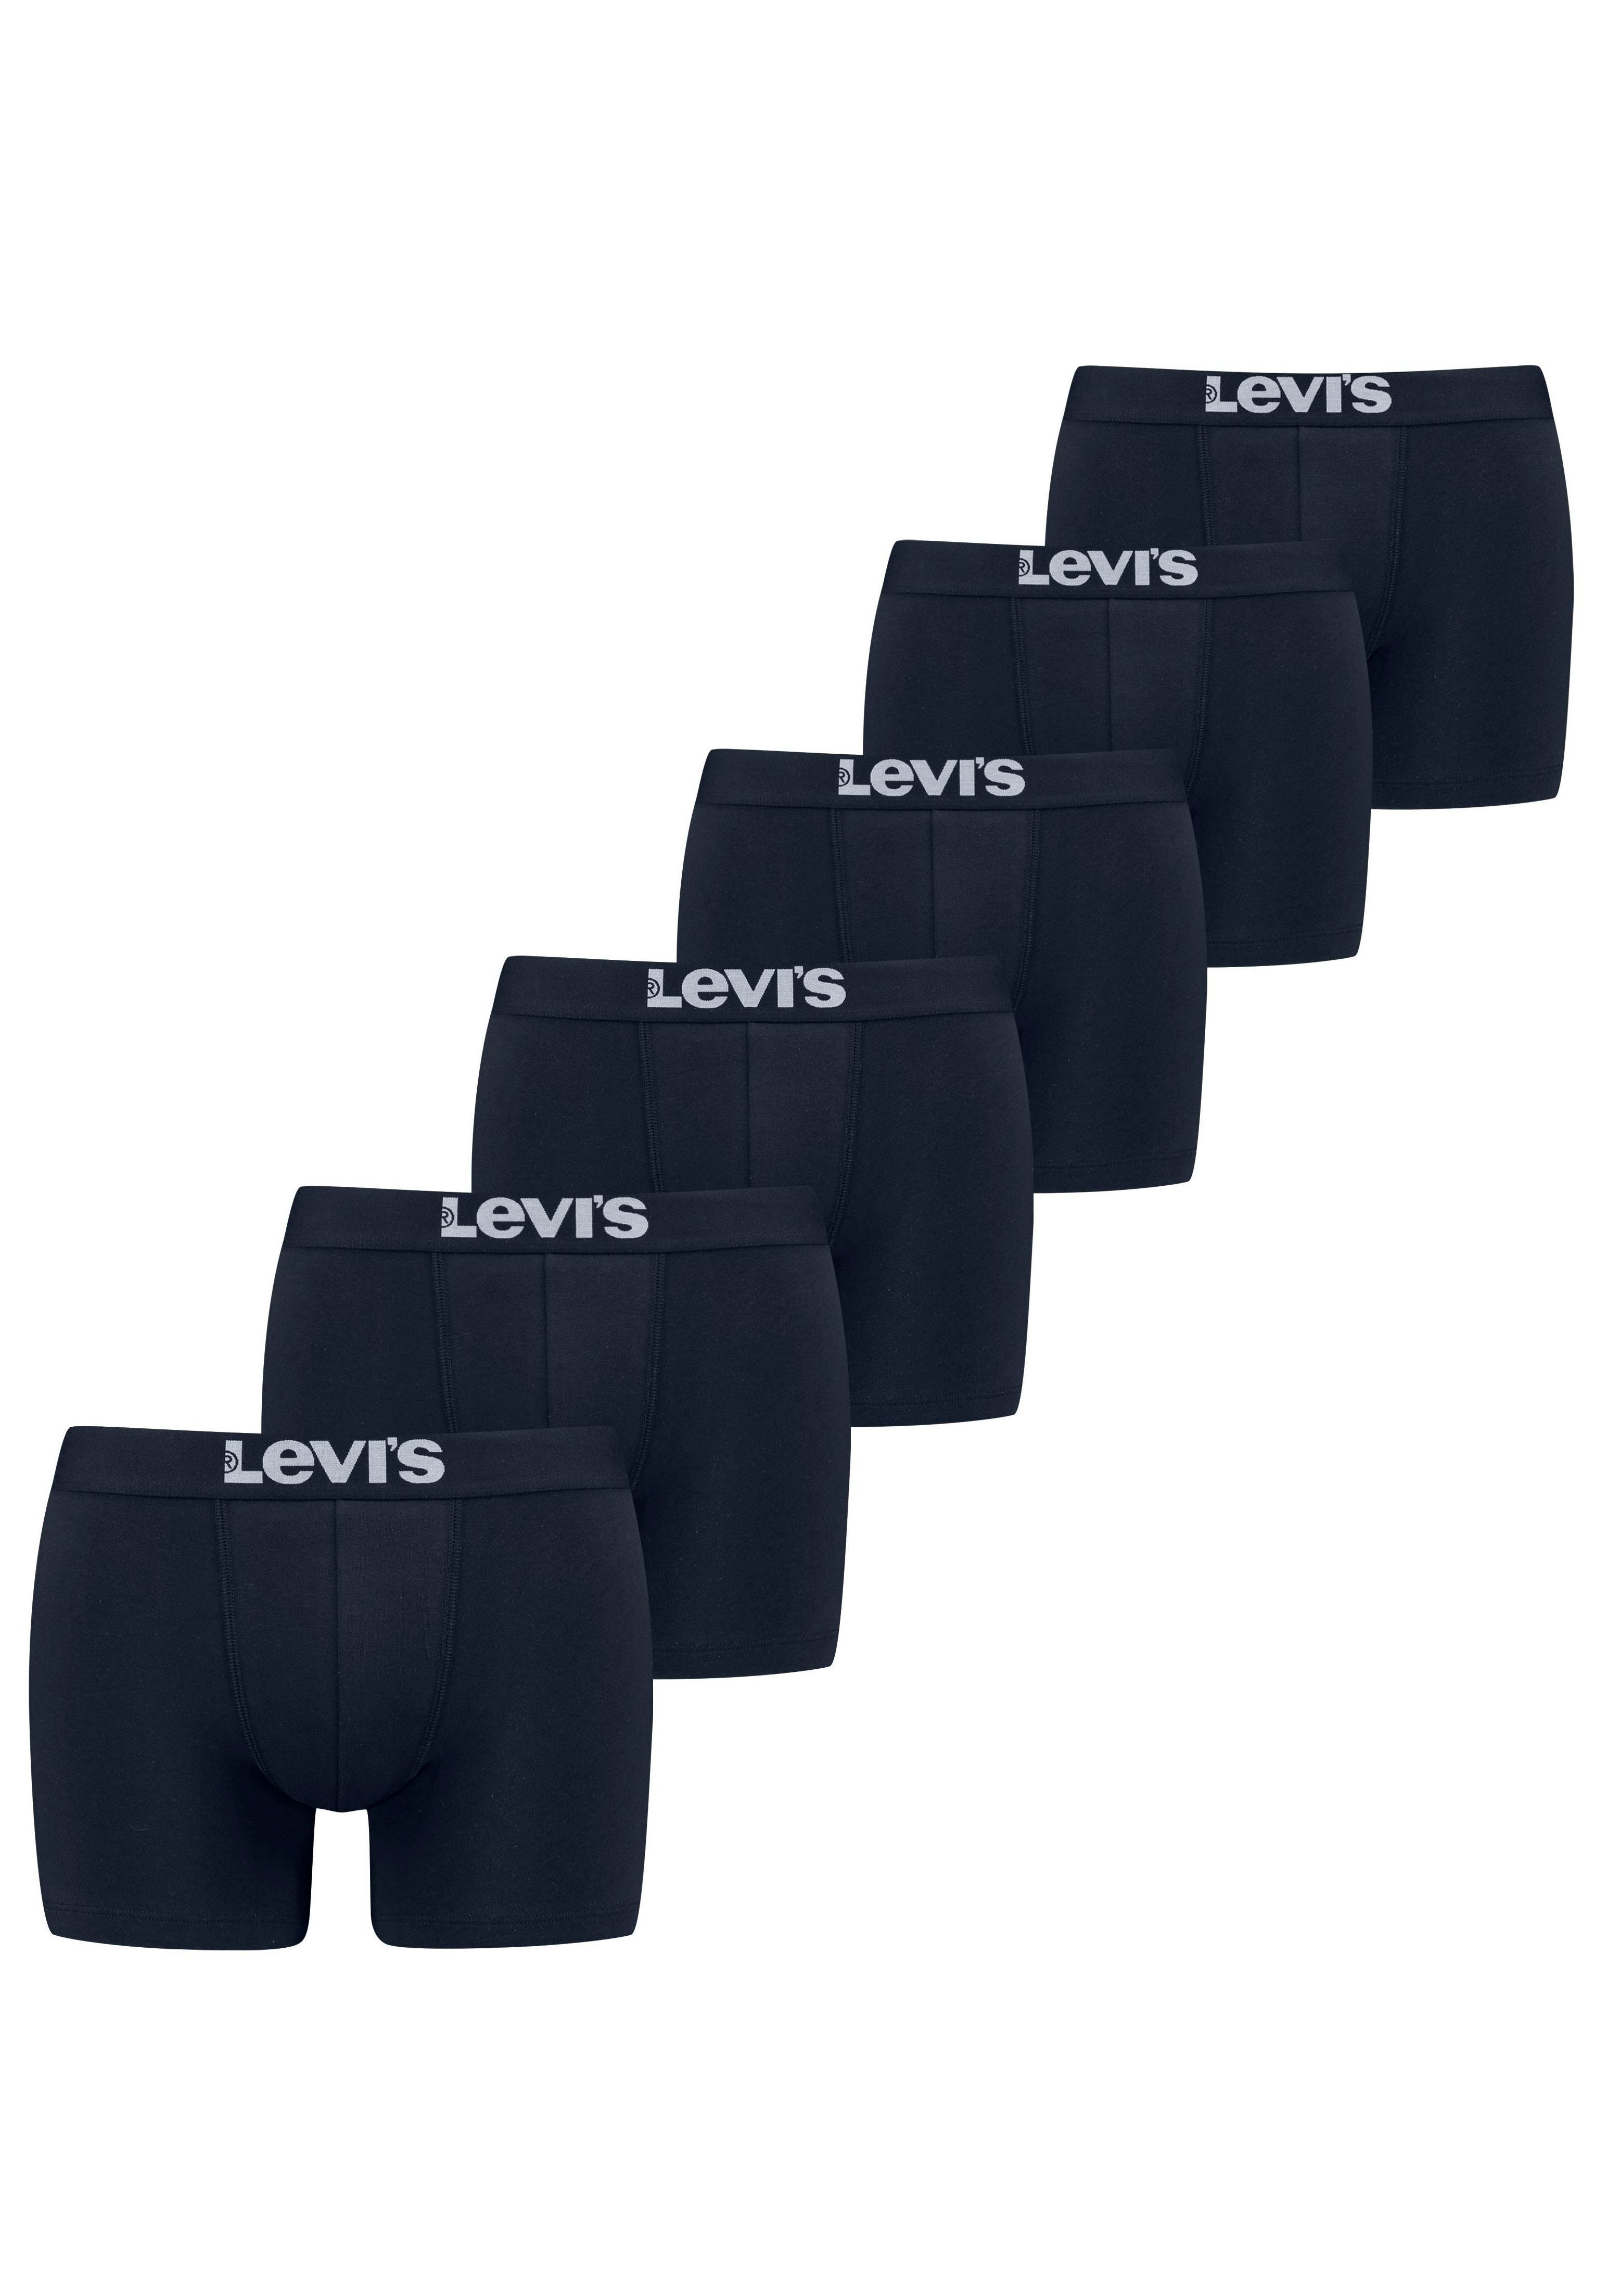 Levi's® ECOM MEN navy BOXER BRIEF 6P Boxershorts BASIC LEVIS ORG (Packung, CO SOLID 6-St)